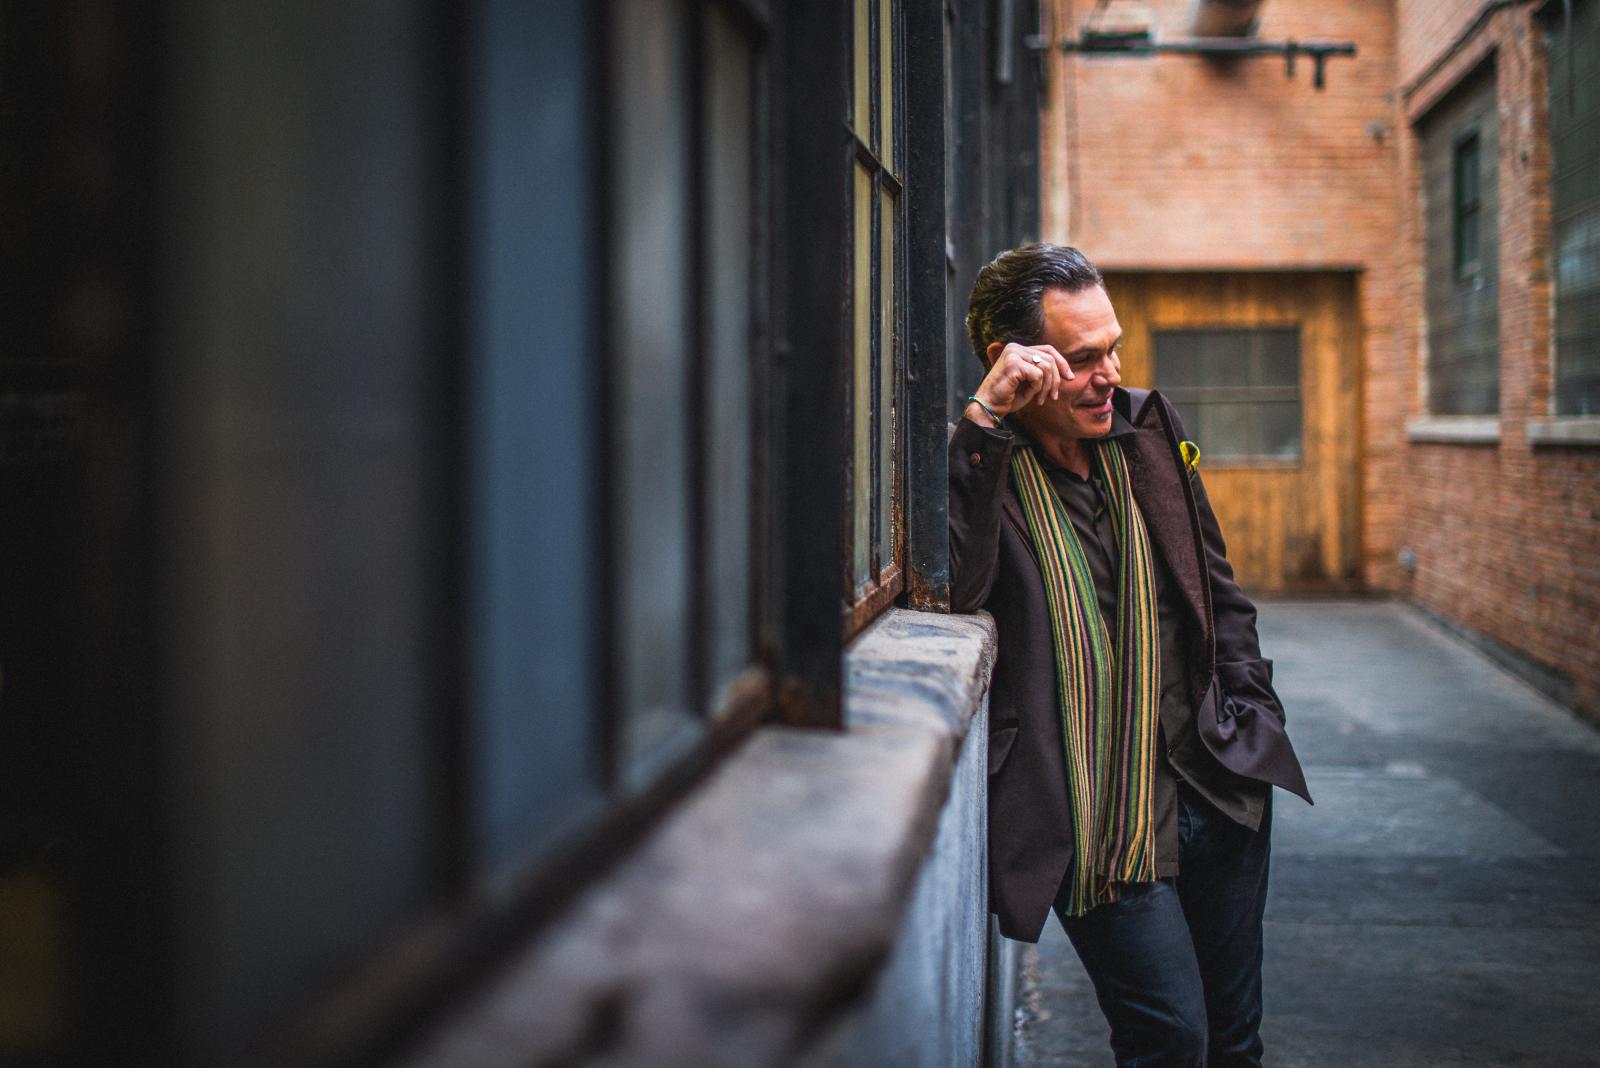 Musician Kurt Elling wearing a scarf and leaning against a building wall